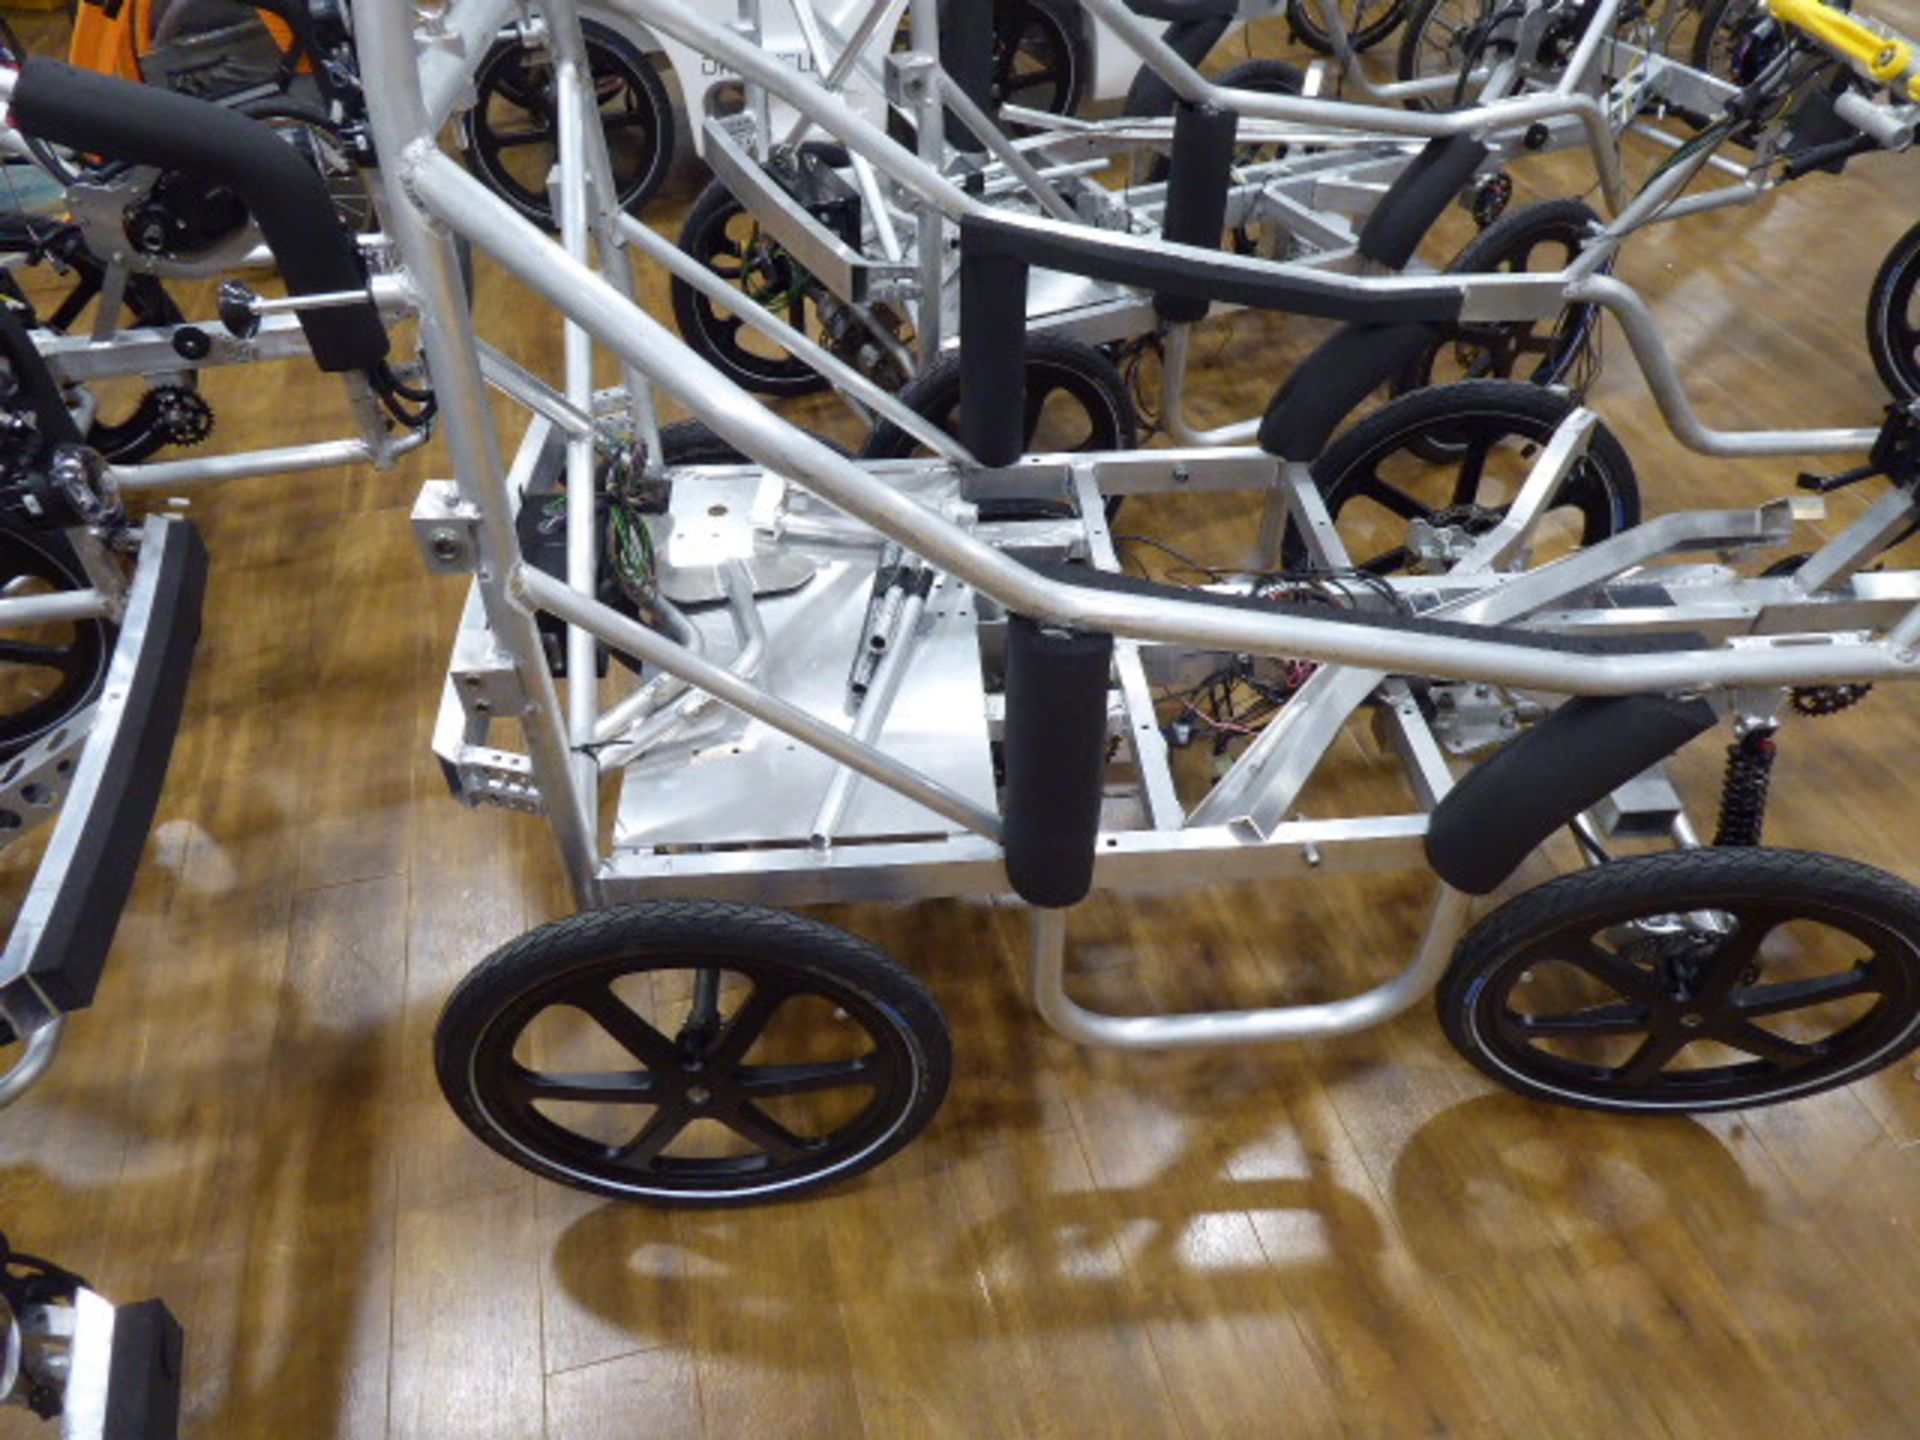 Rolling DryCycle electric assist pedal cycle aluminium frame incl. wheels, tyres, motor, gearbox, - Image 3 of 3